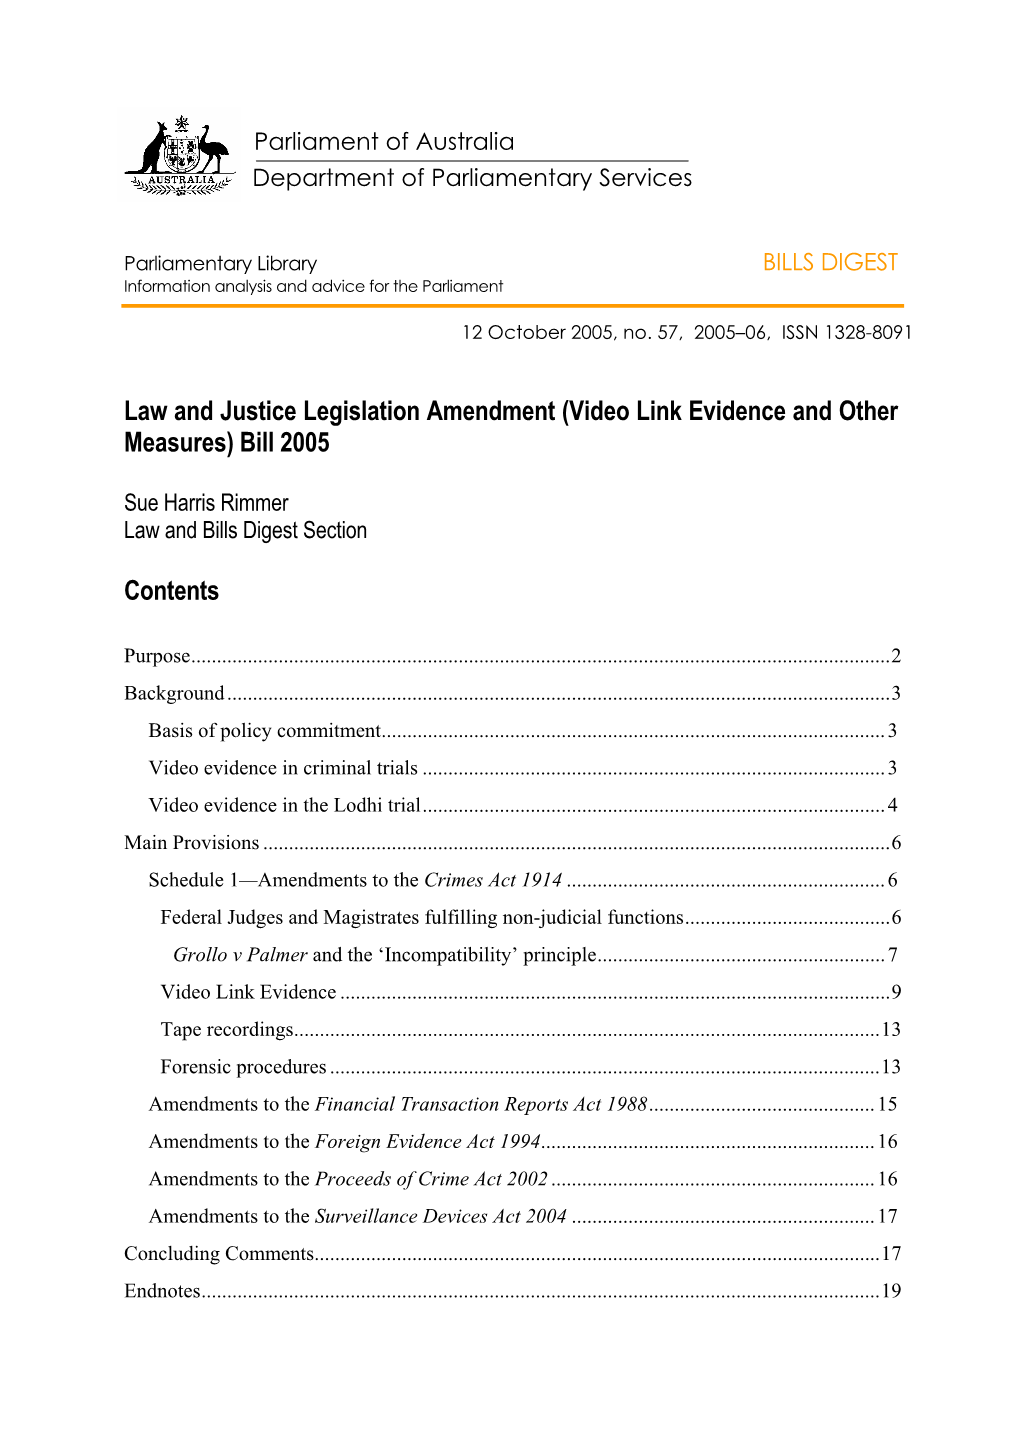 Law and Justice Legislation Amendment (Video Link Evidence and Other Measures) Bill 2005